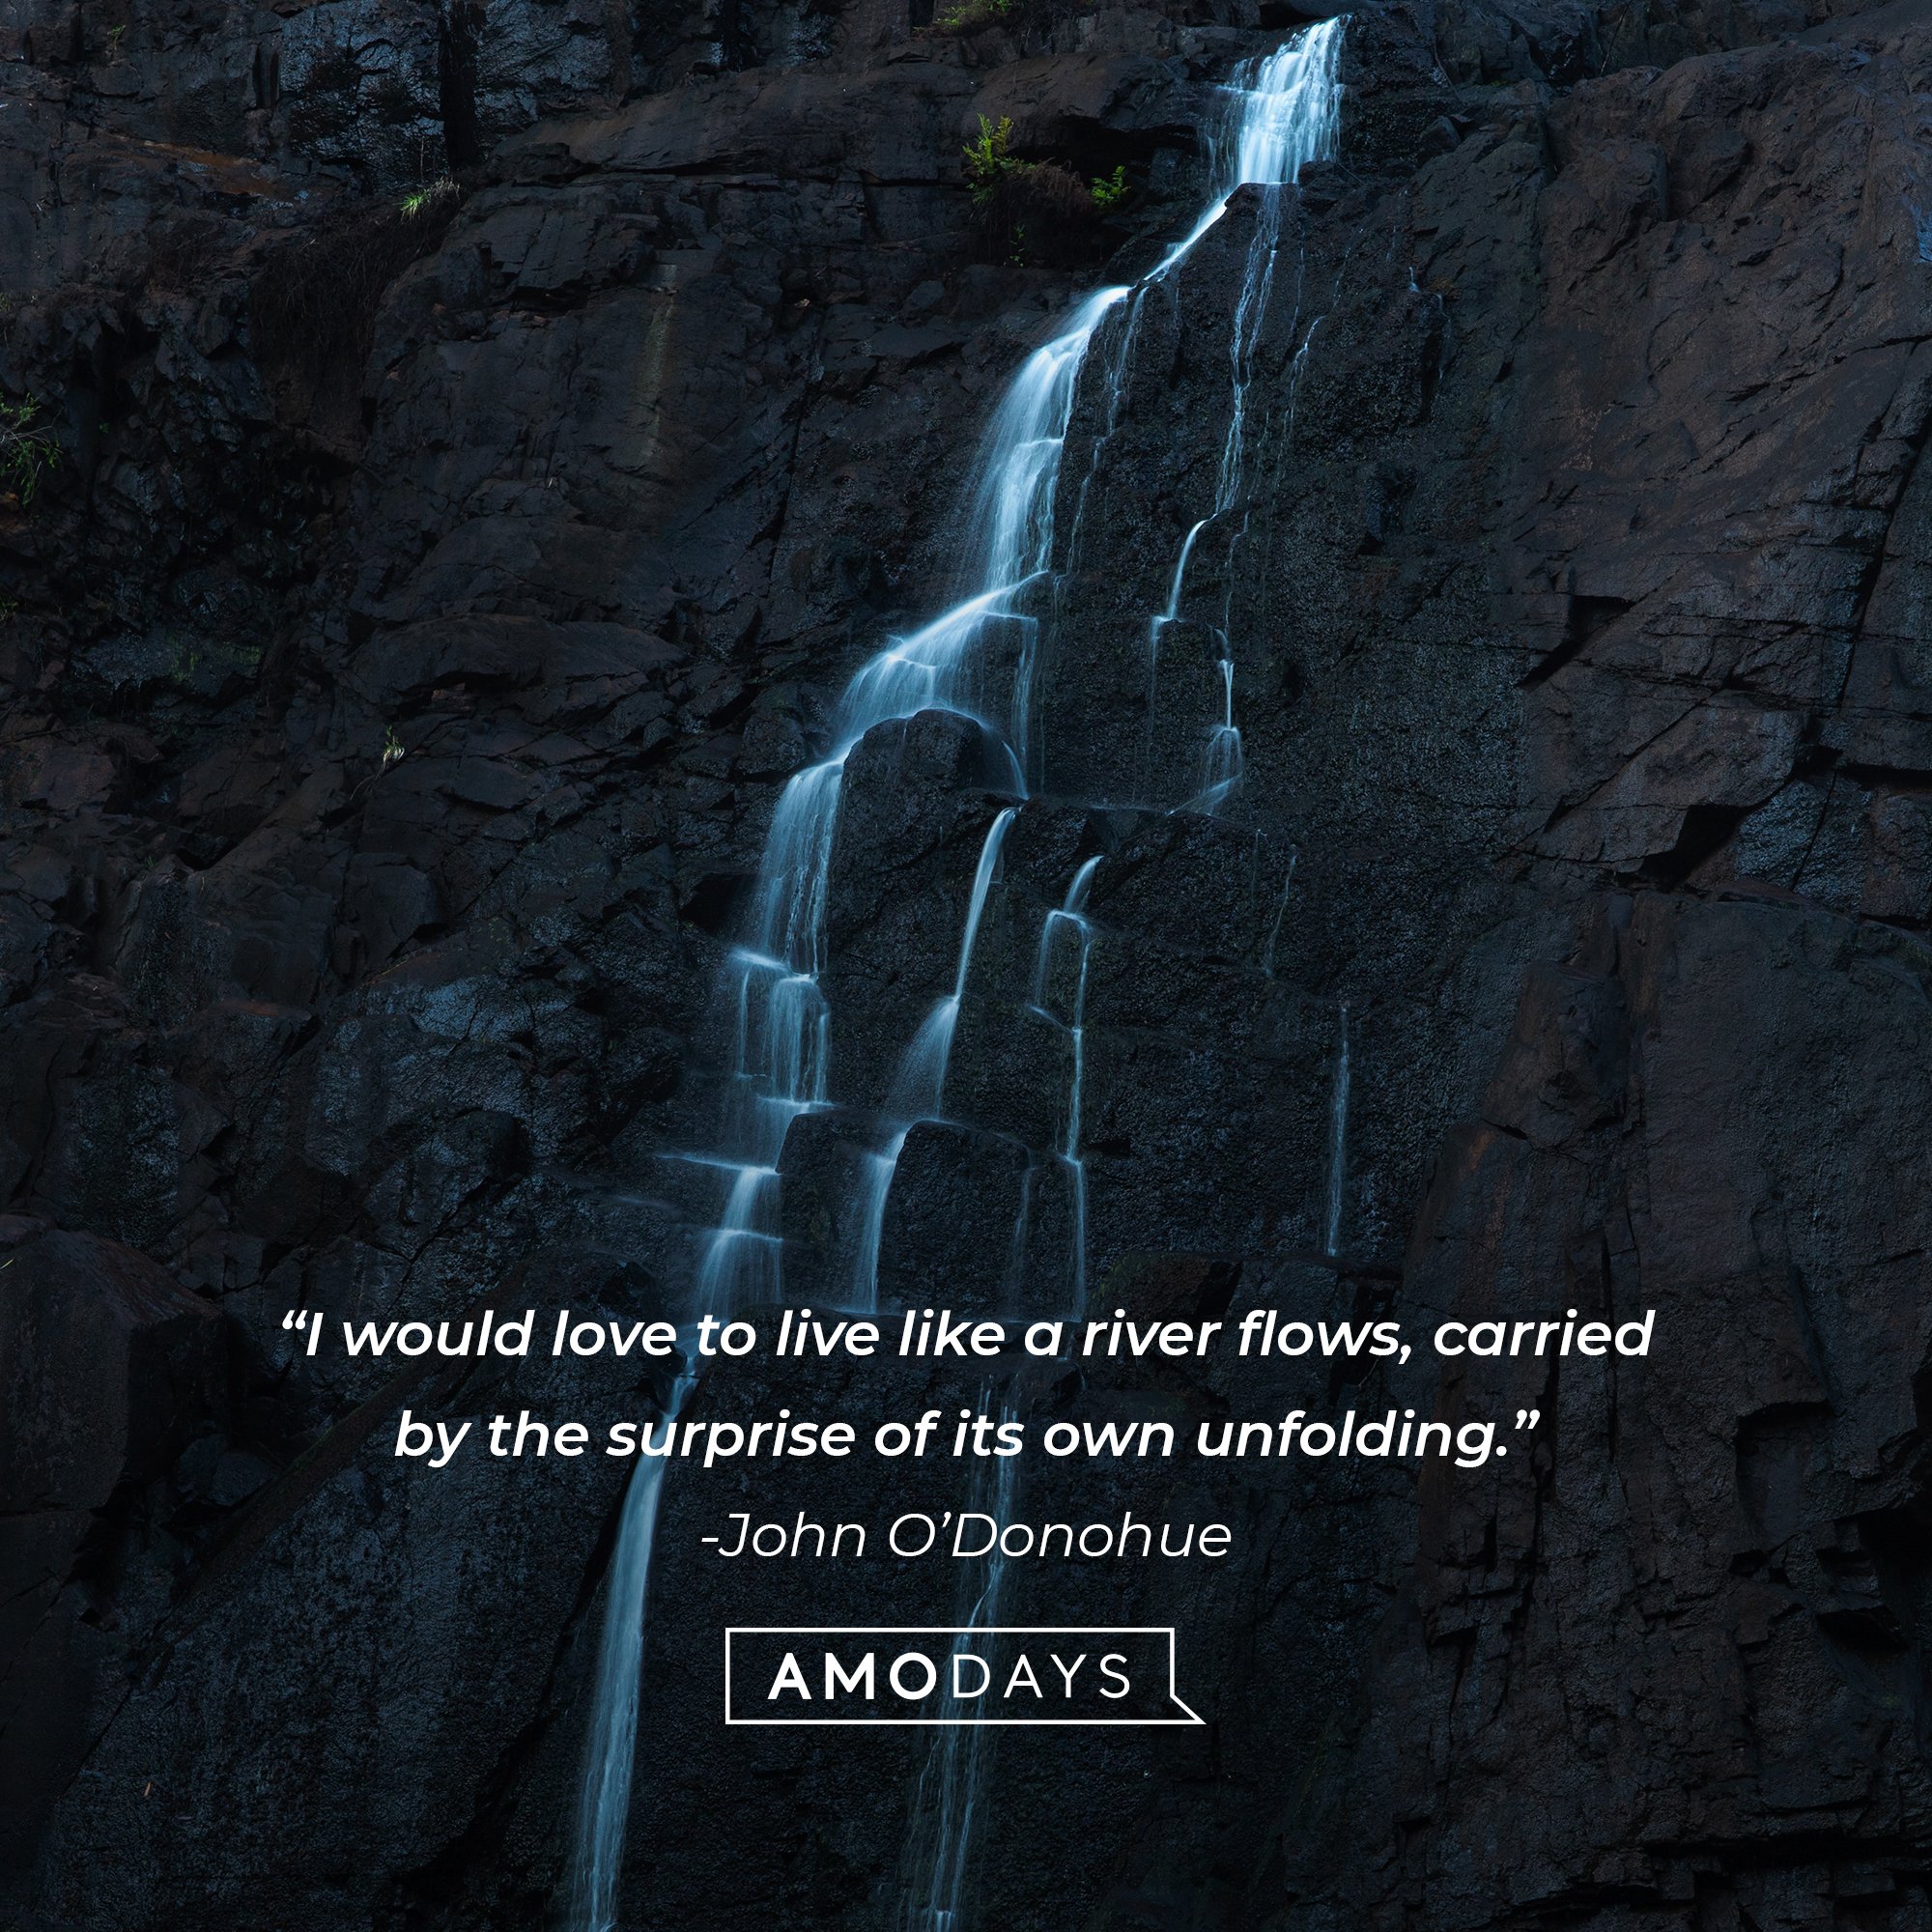 John O’Donohue’s quote: “I would love to live like a river flows, carried by the surprise of its own unfolding.” | Image: AmoDays